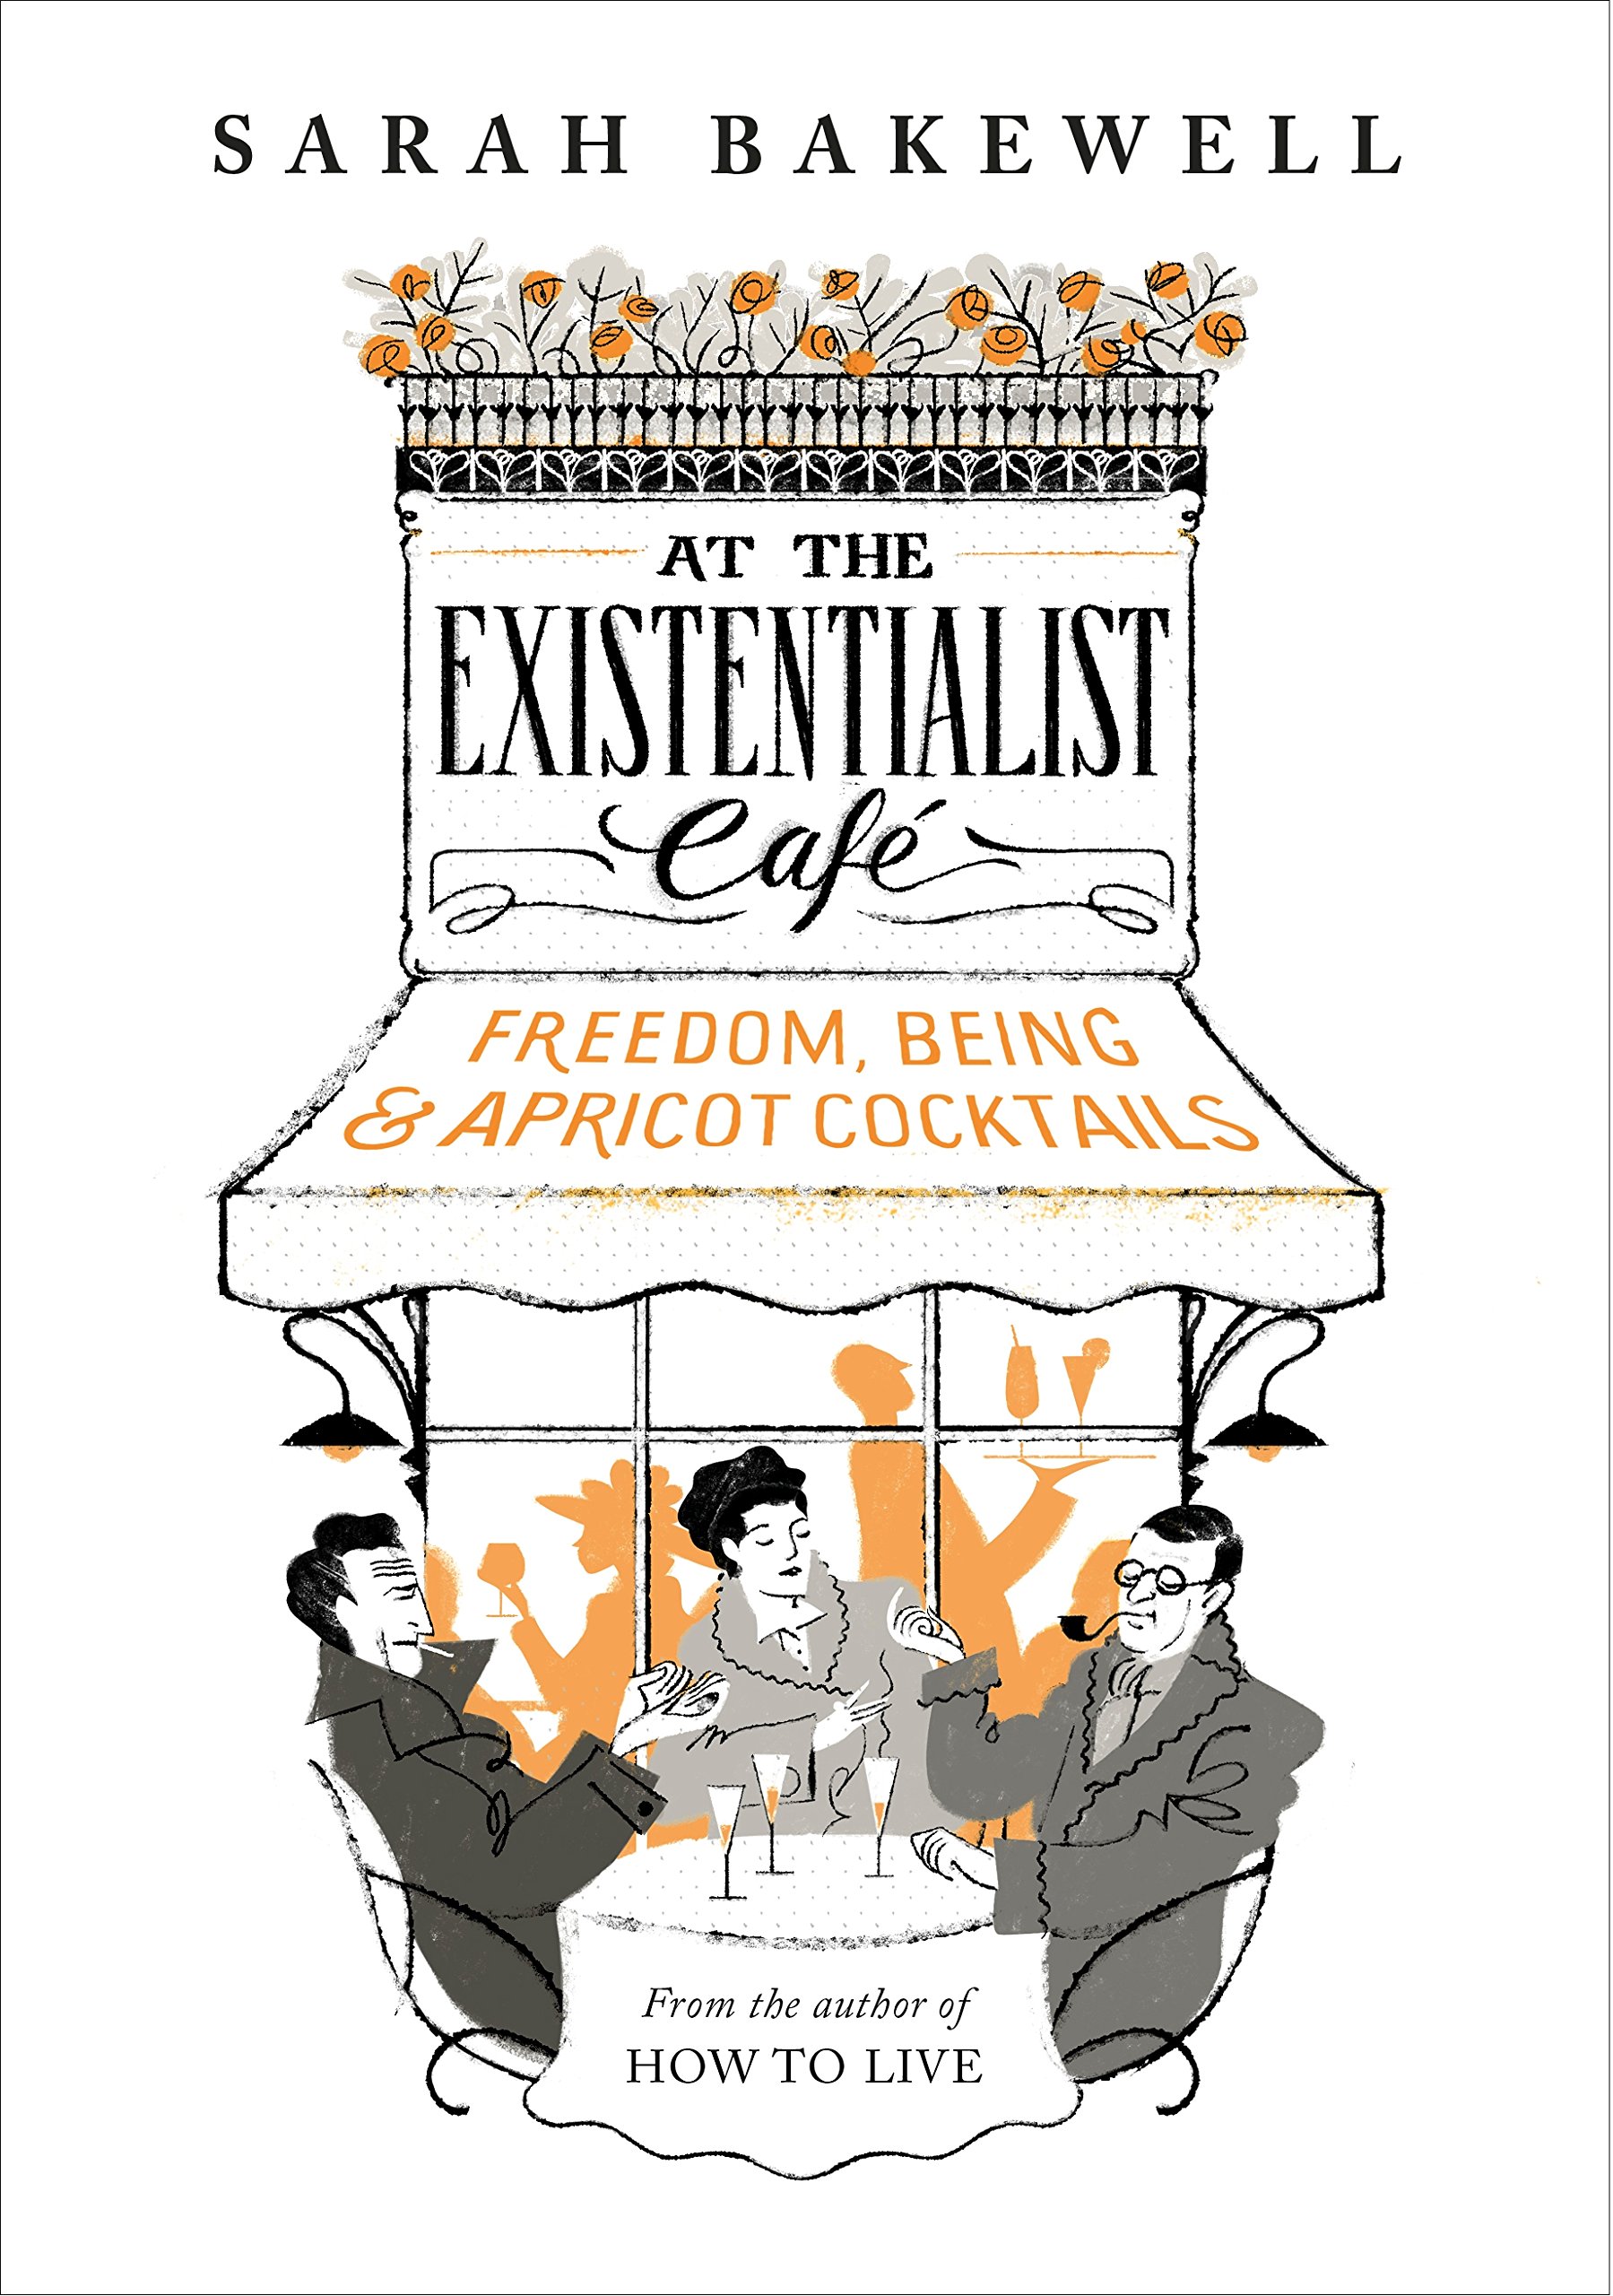 At the Existentialist Cafe by Sarah Bakewell